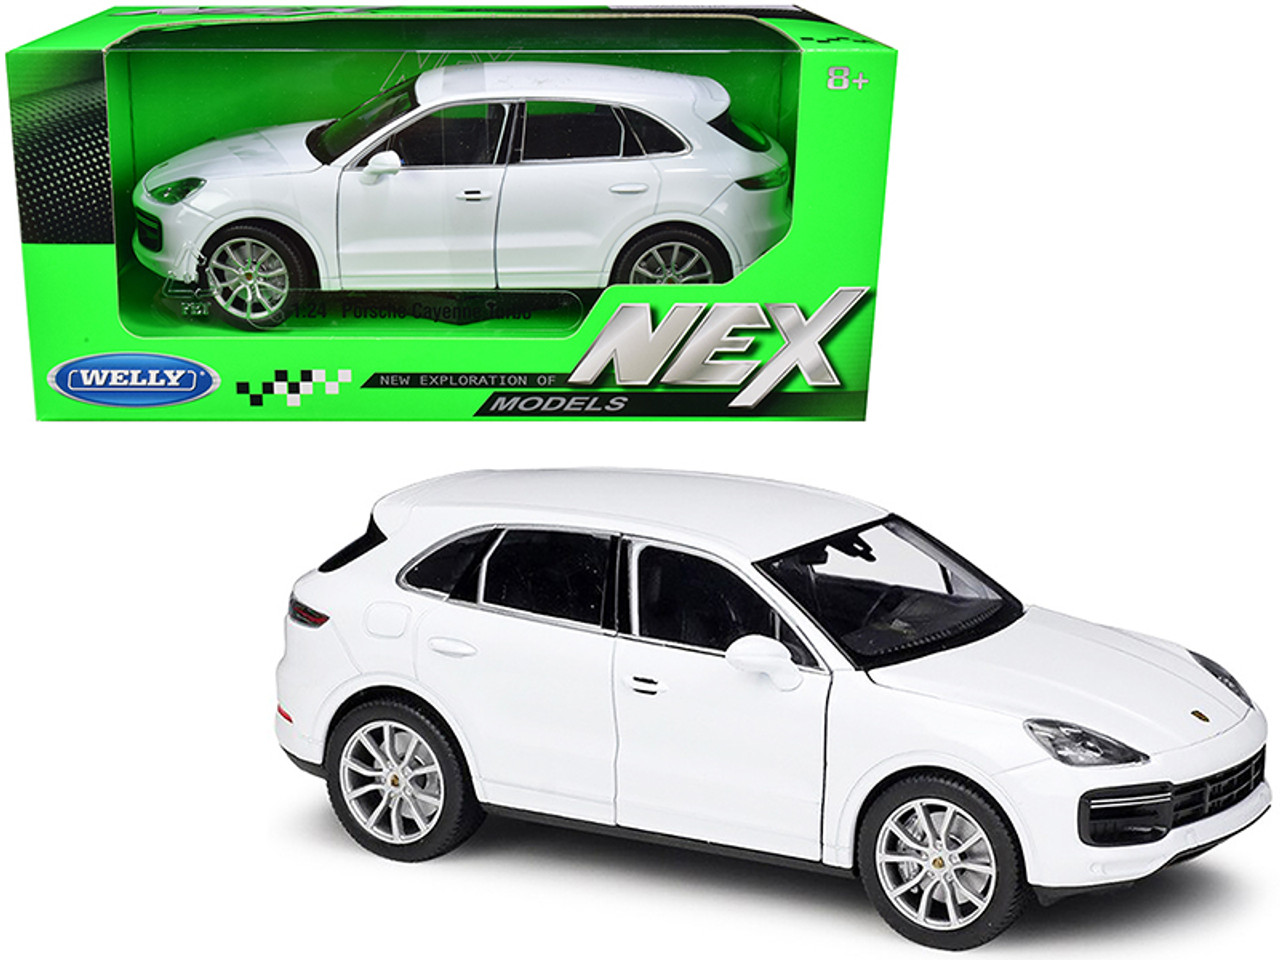 Porsche Cayenne Turbo White with Silver Wheels "NEX Models" 1/24 Diecast Model Car by Welly